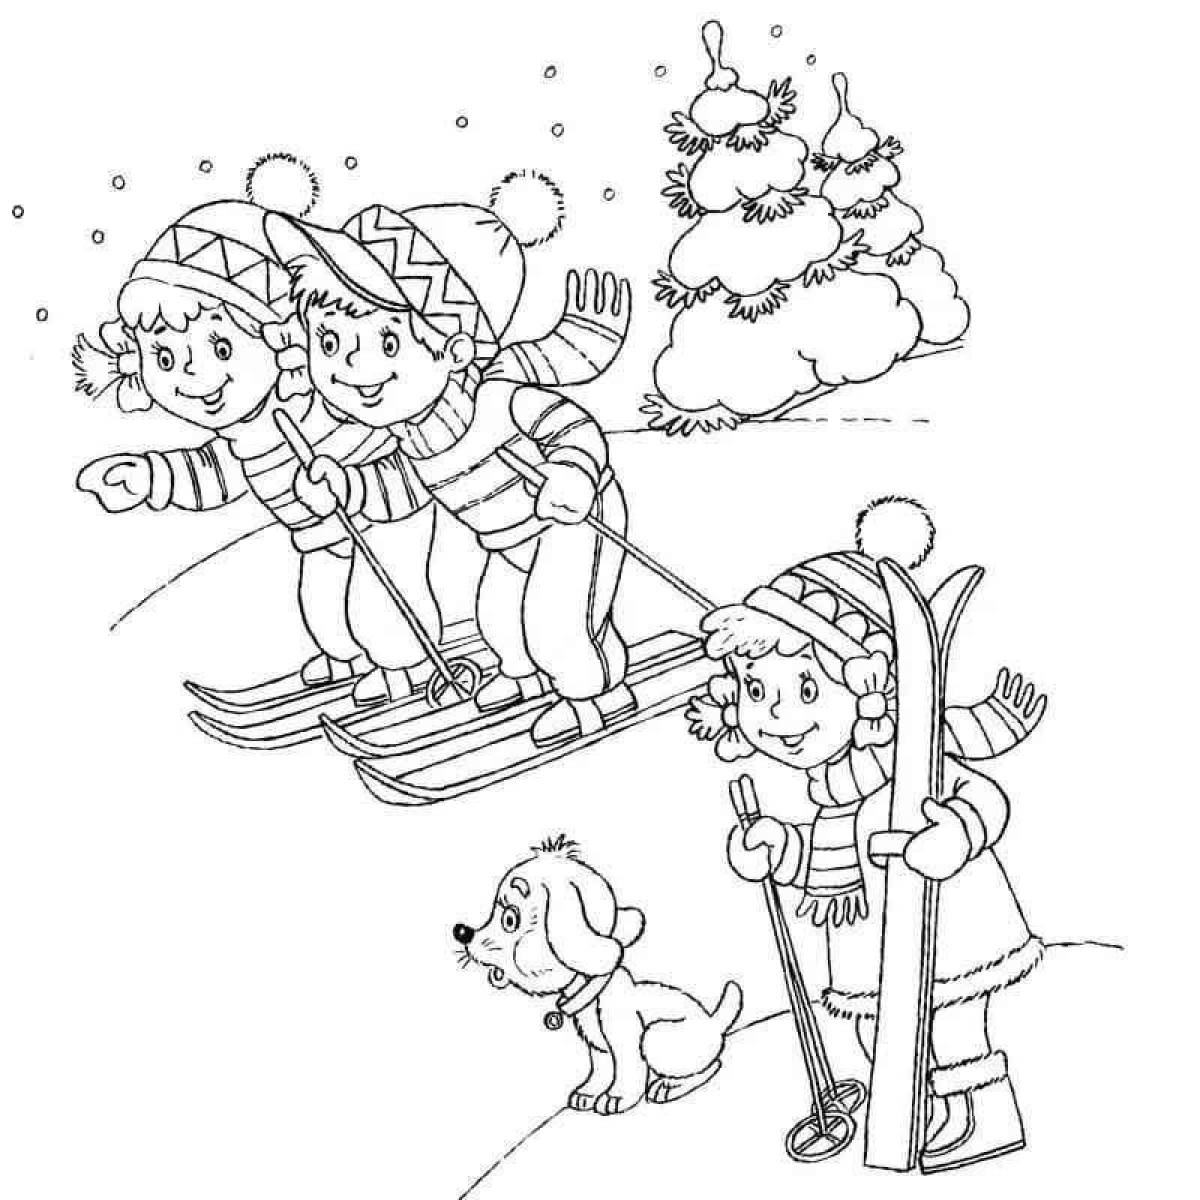 Animated winter fun coloring page